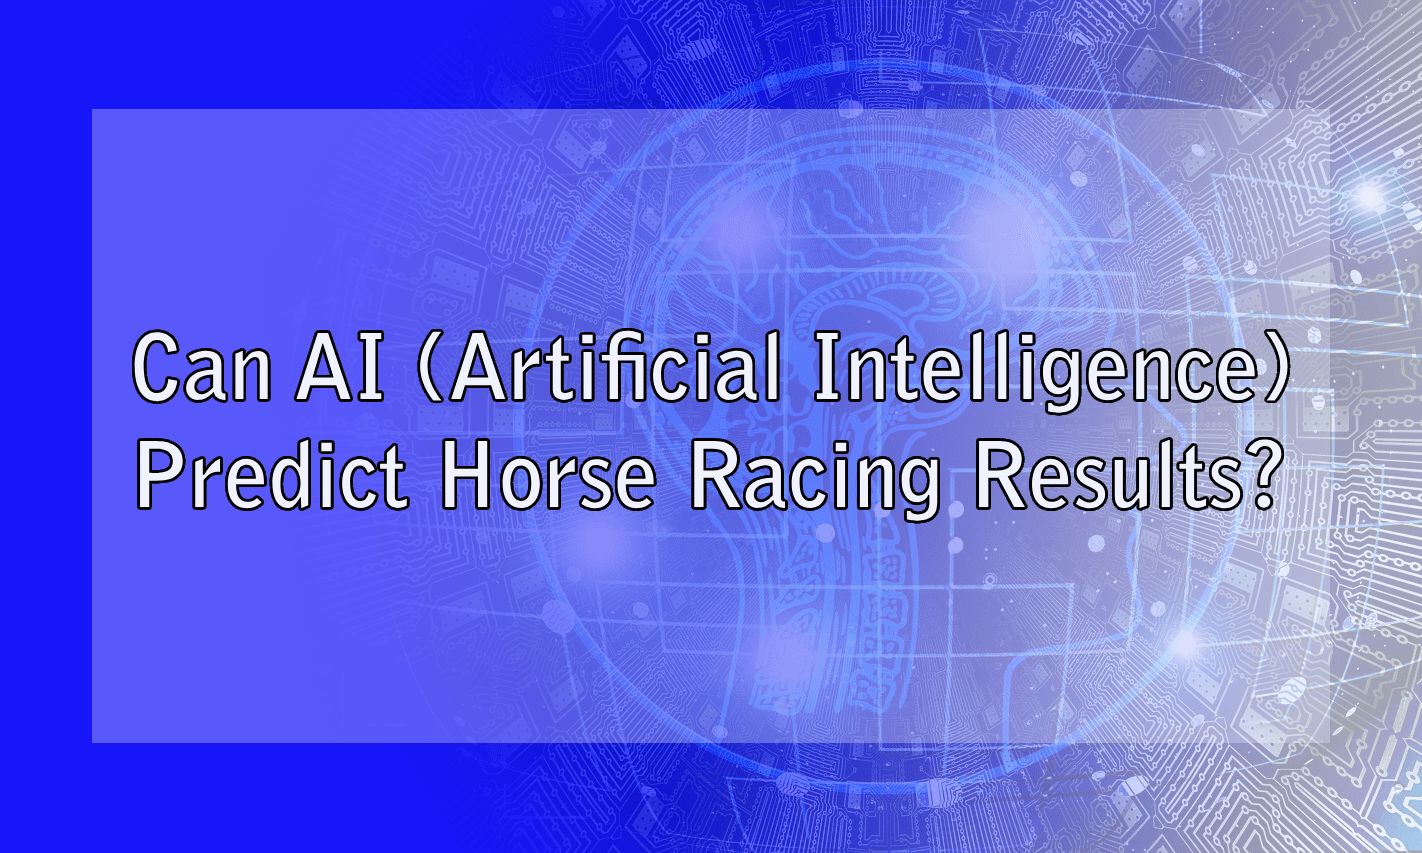 Can AI (Artificial Intelligence) Predict Horse Racing Results?